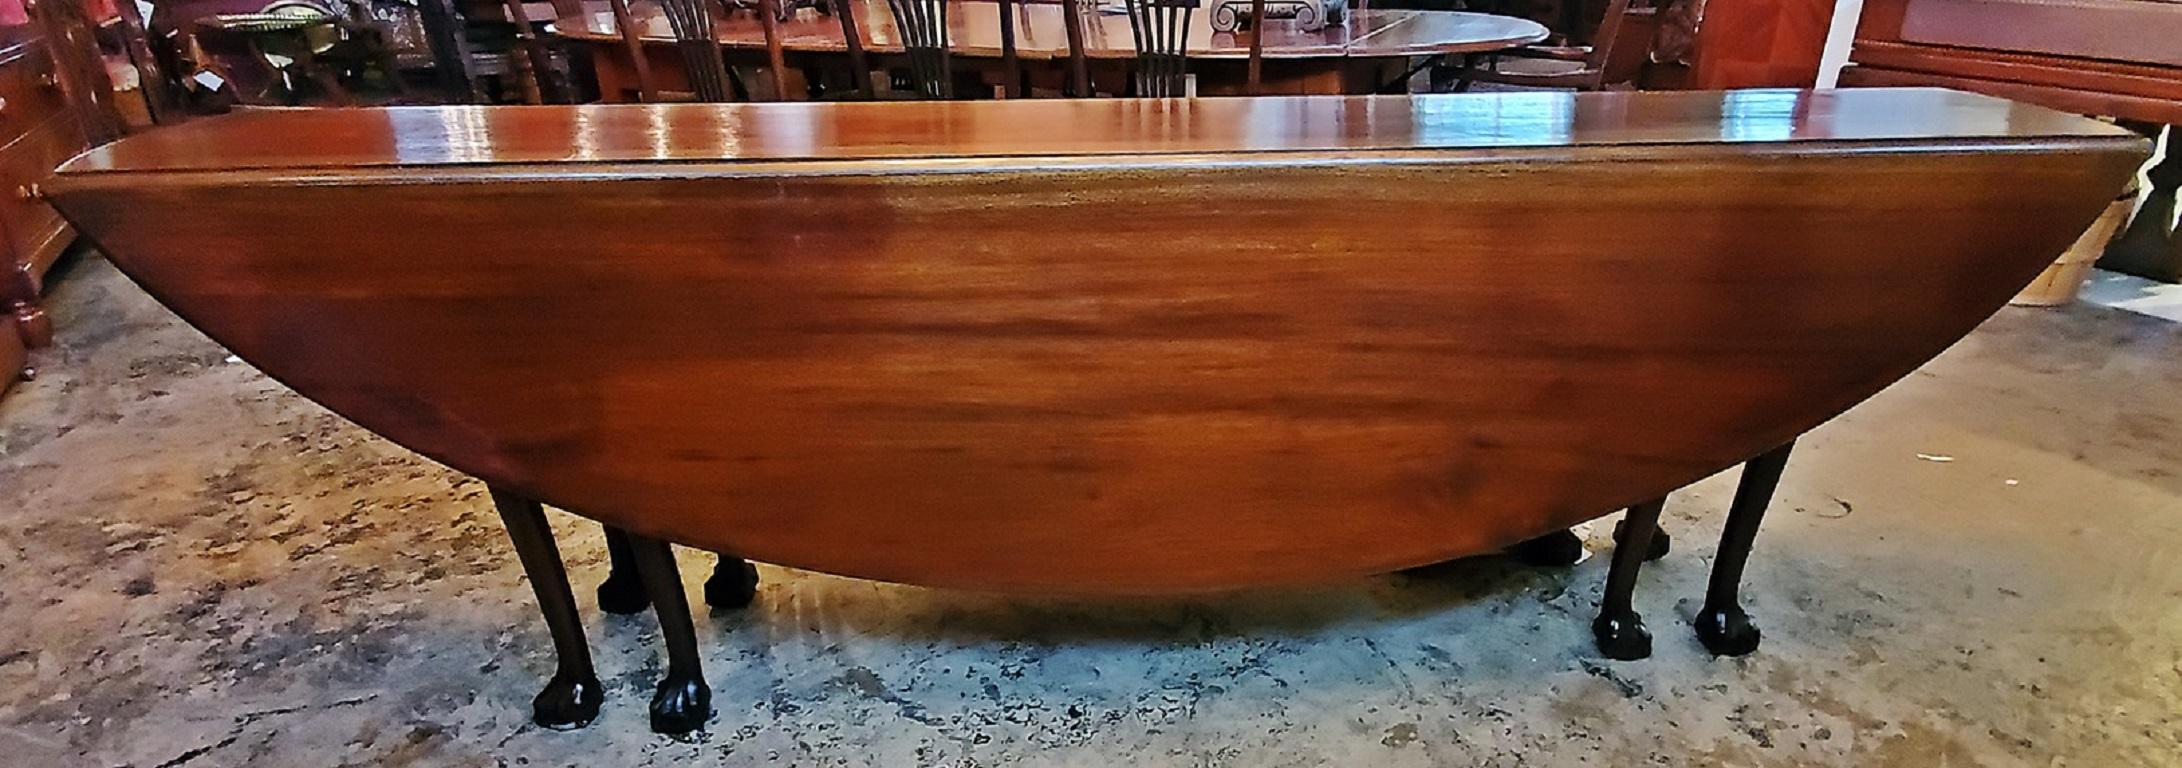 Presenting a gorgeous 19tn century Country Squires mahogany hunt table.

This table was made in the late 19th century circa 1880, and is made of solid mahogany and sits on 8 legs with ball and claw feet.

2 drop-leafs on either side supported by